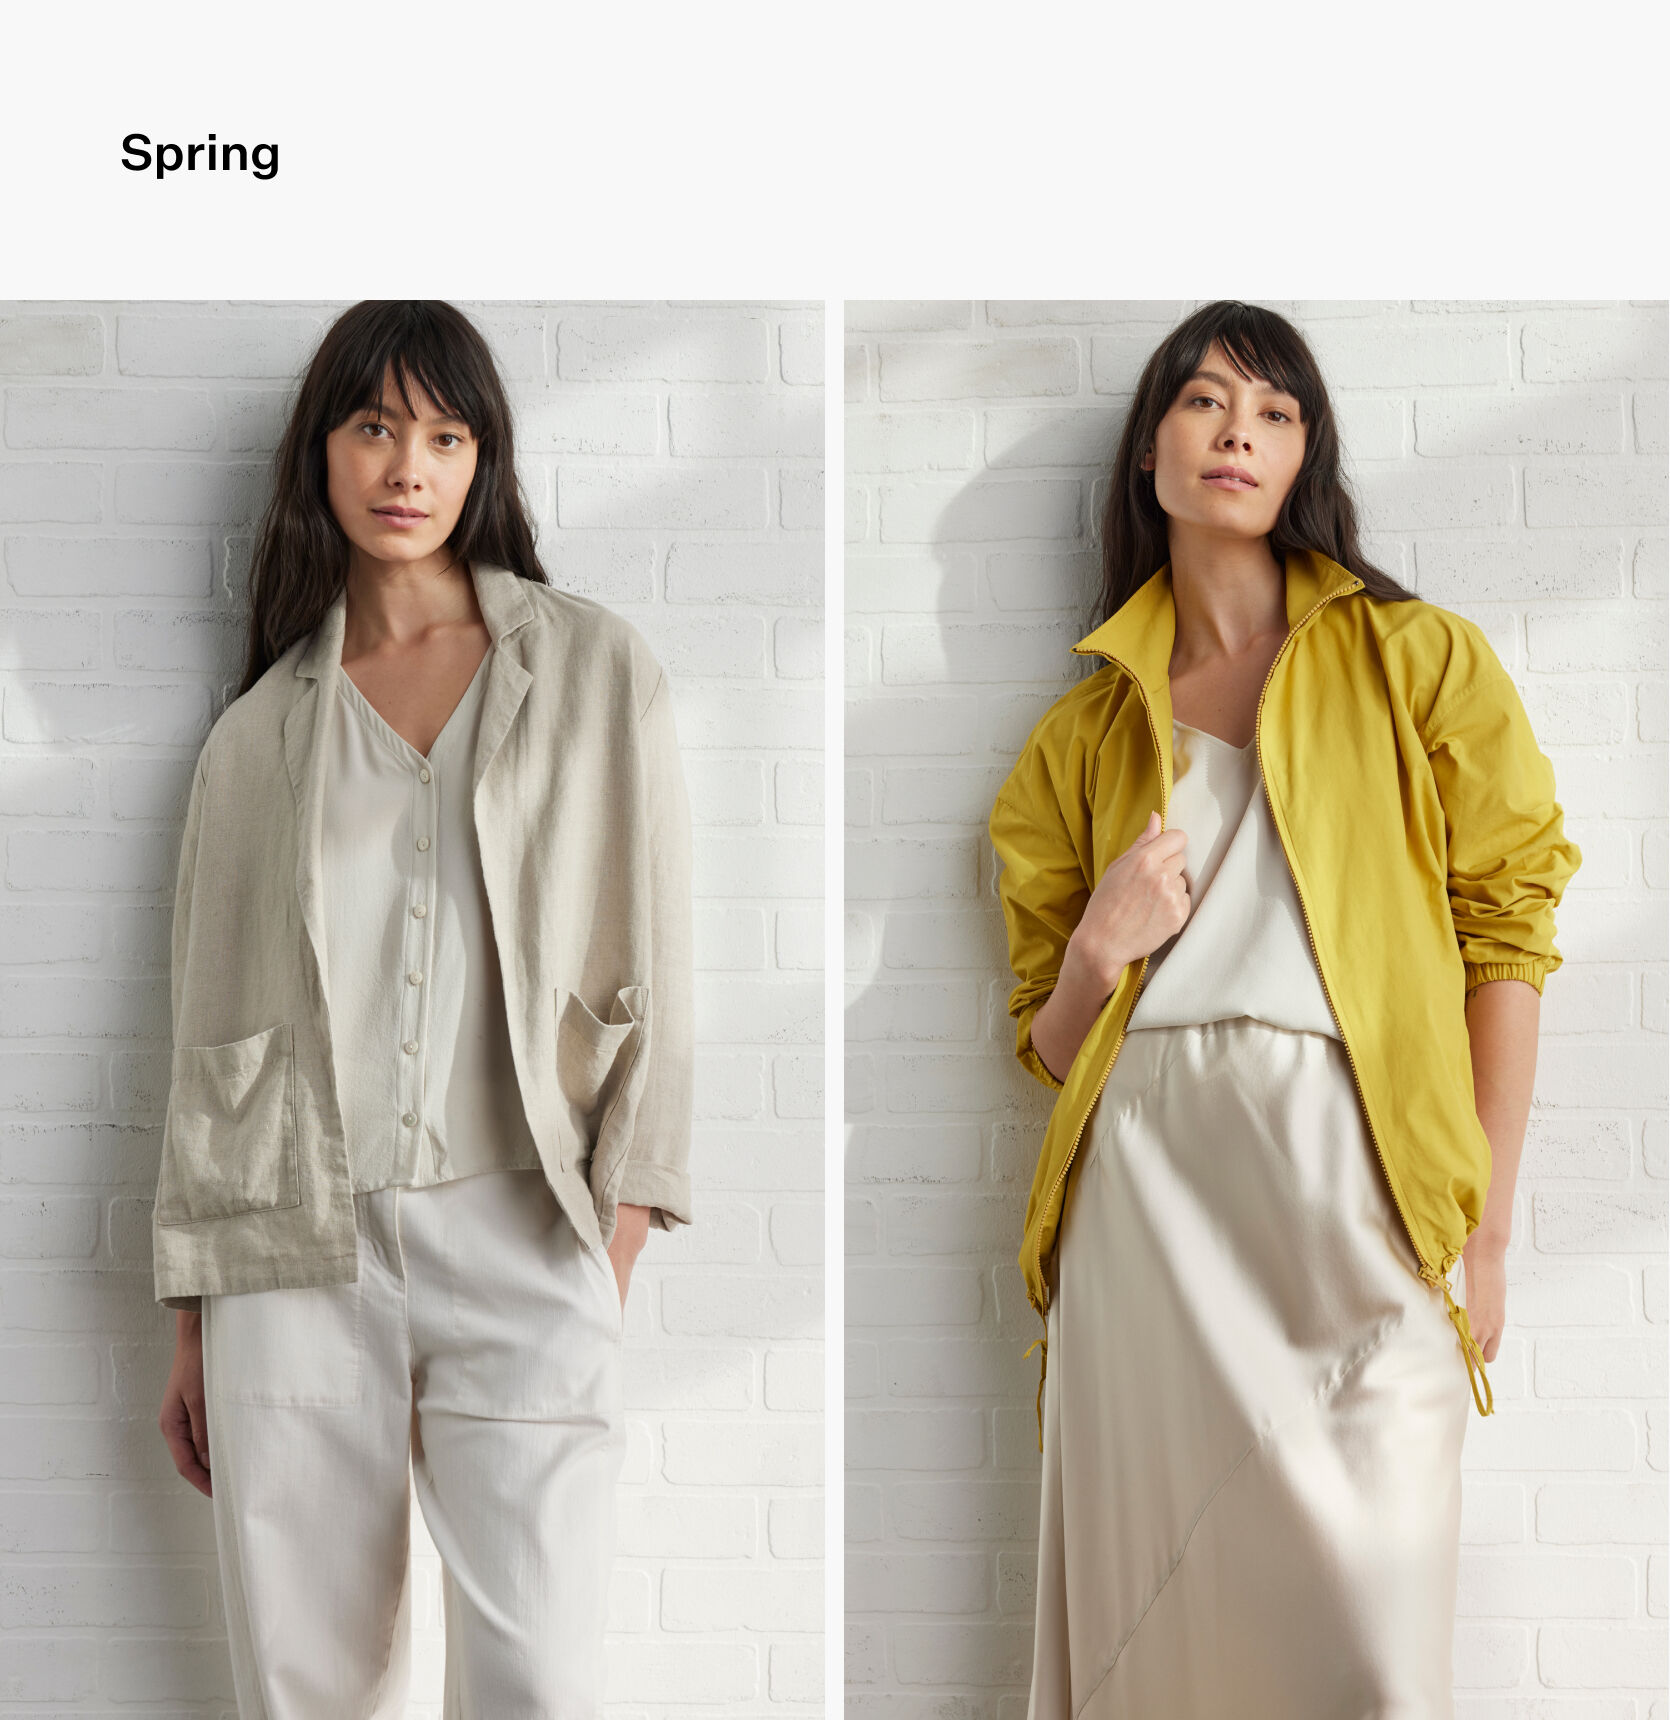 How to style neutral silk pieces for spring.